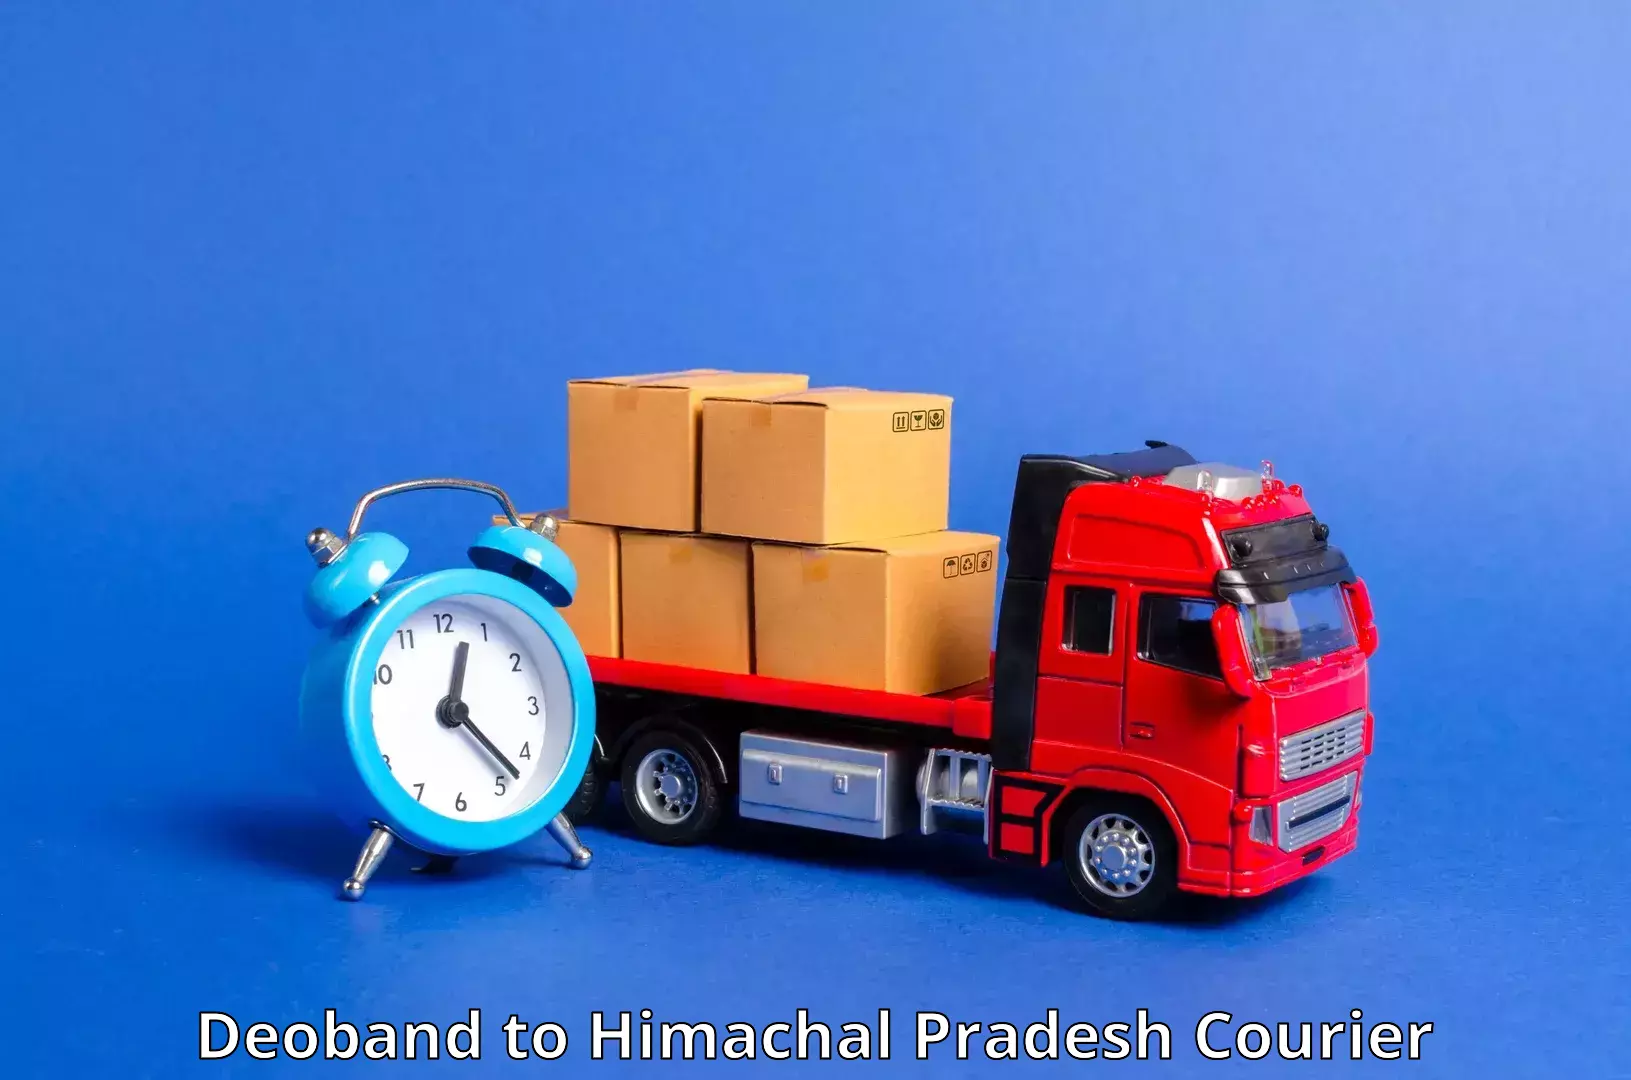 Nationwide parcel services Deoband to Himachal Pradesh